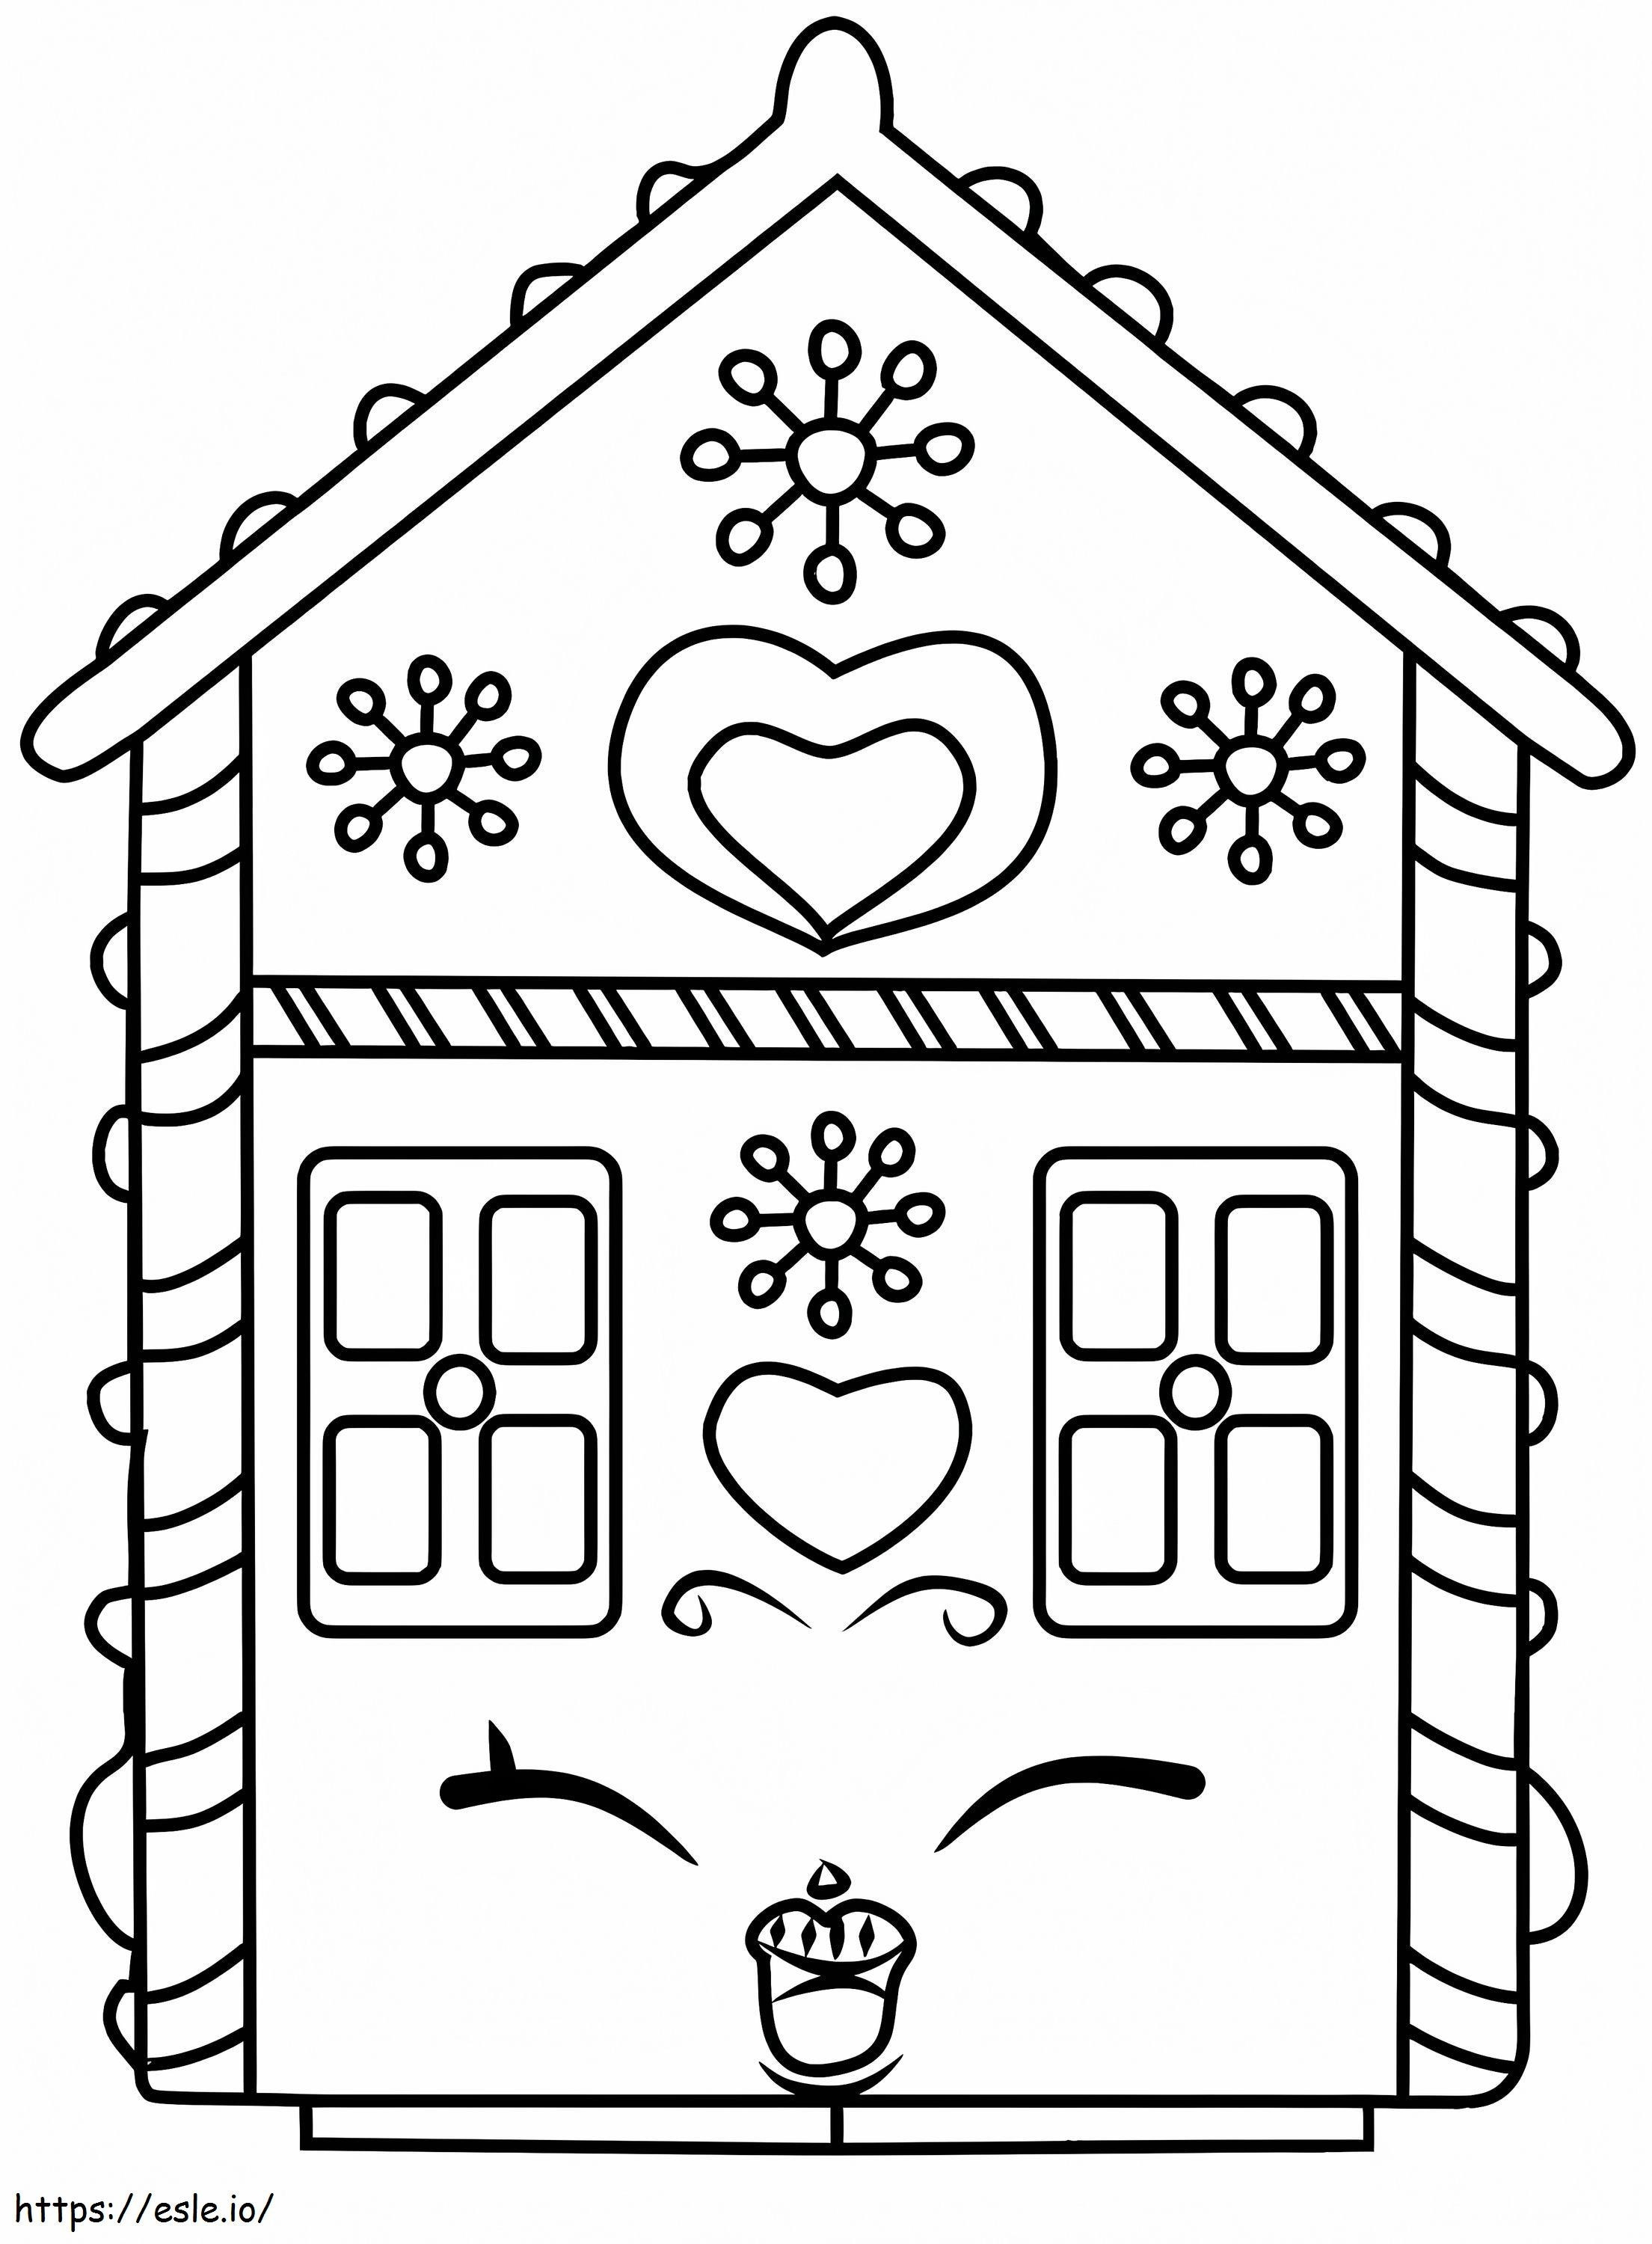 Ginger Fred Shopkins coloring page